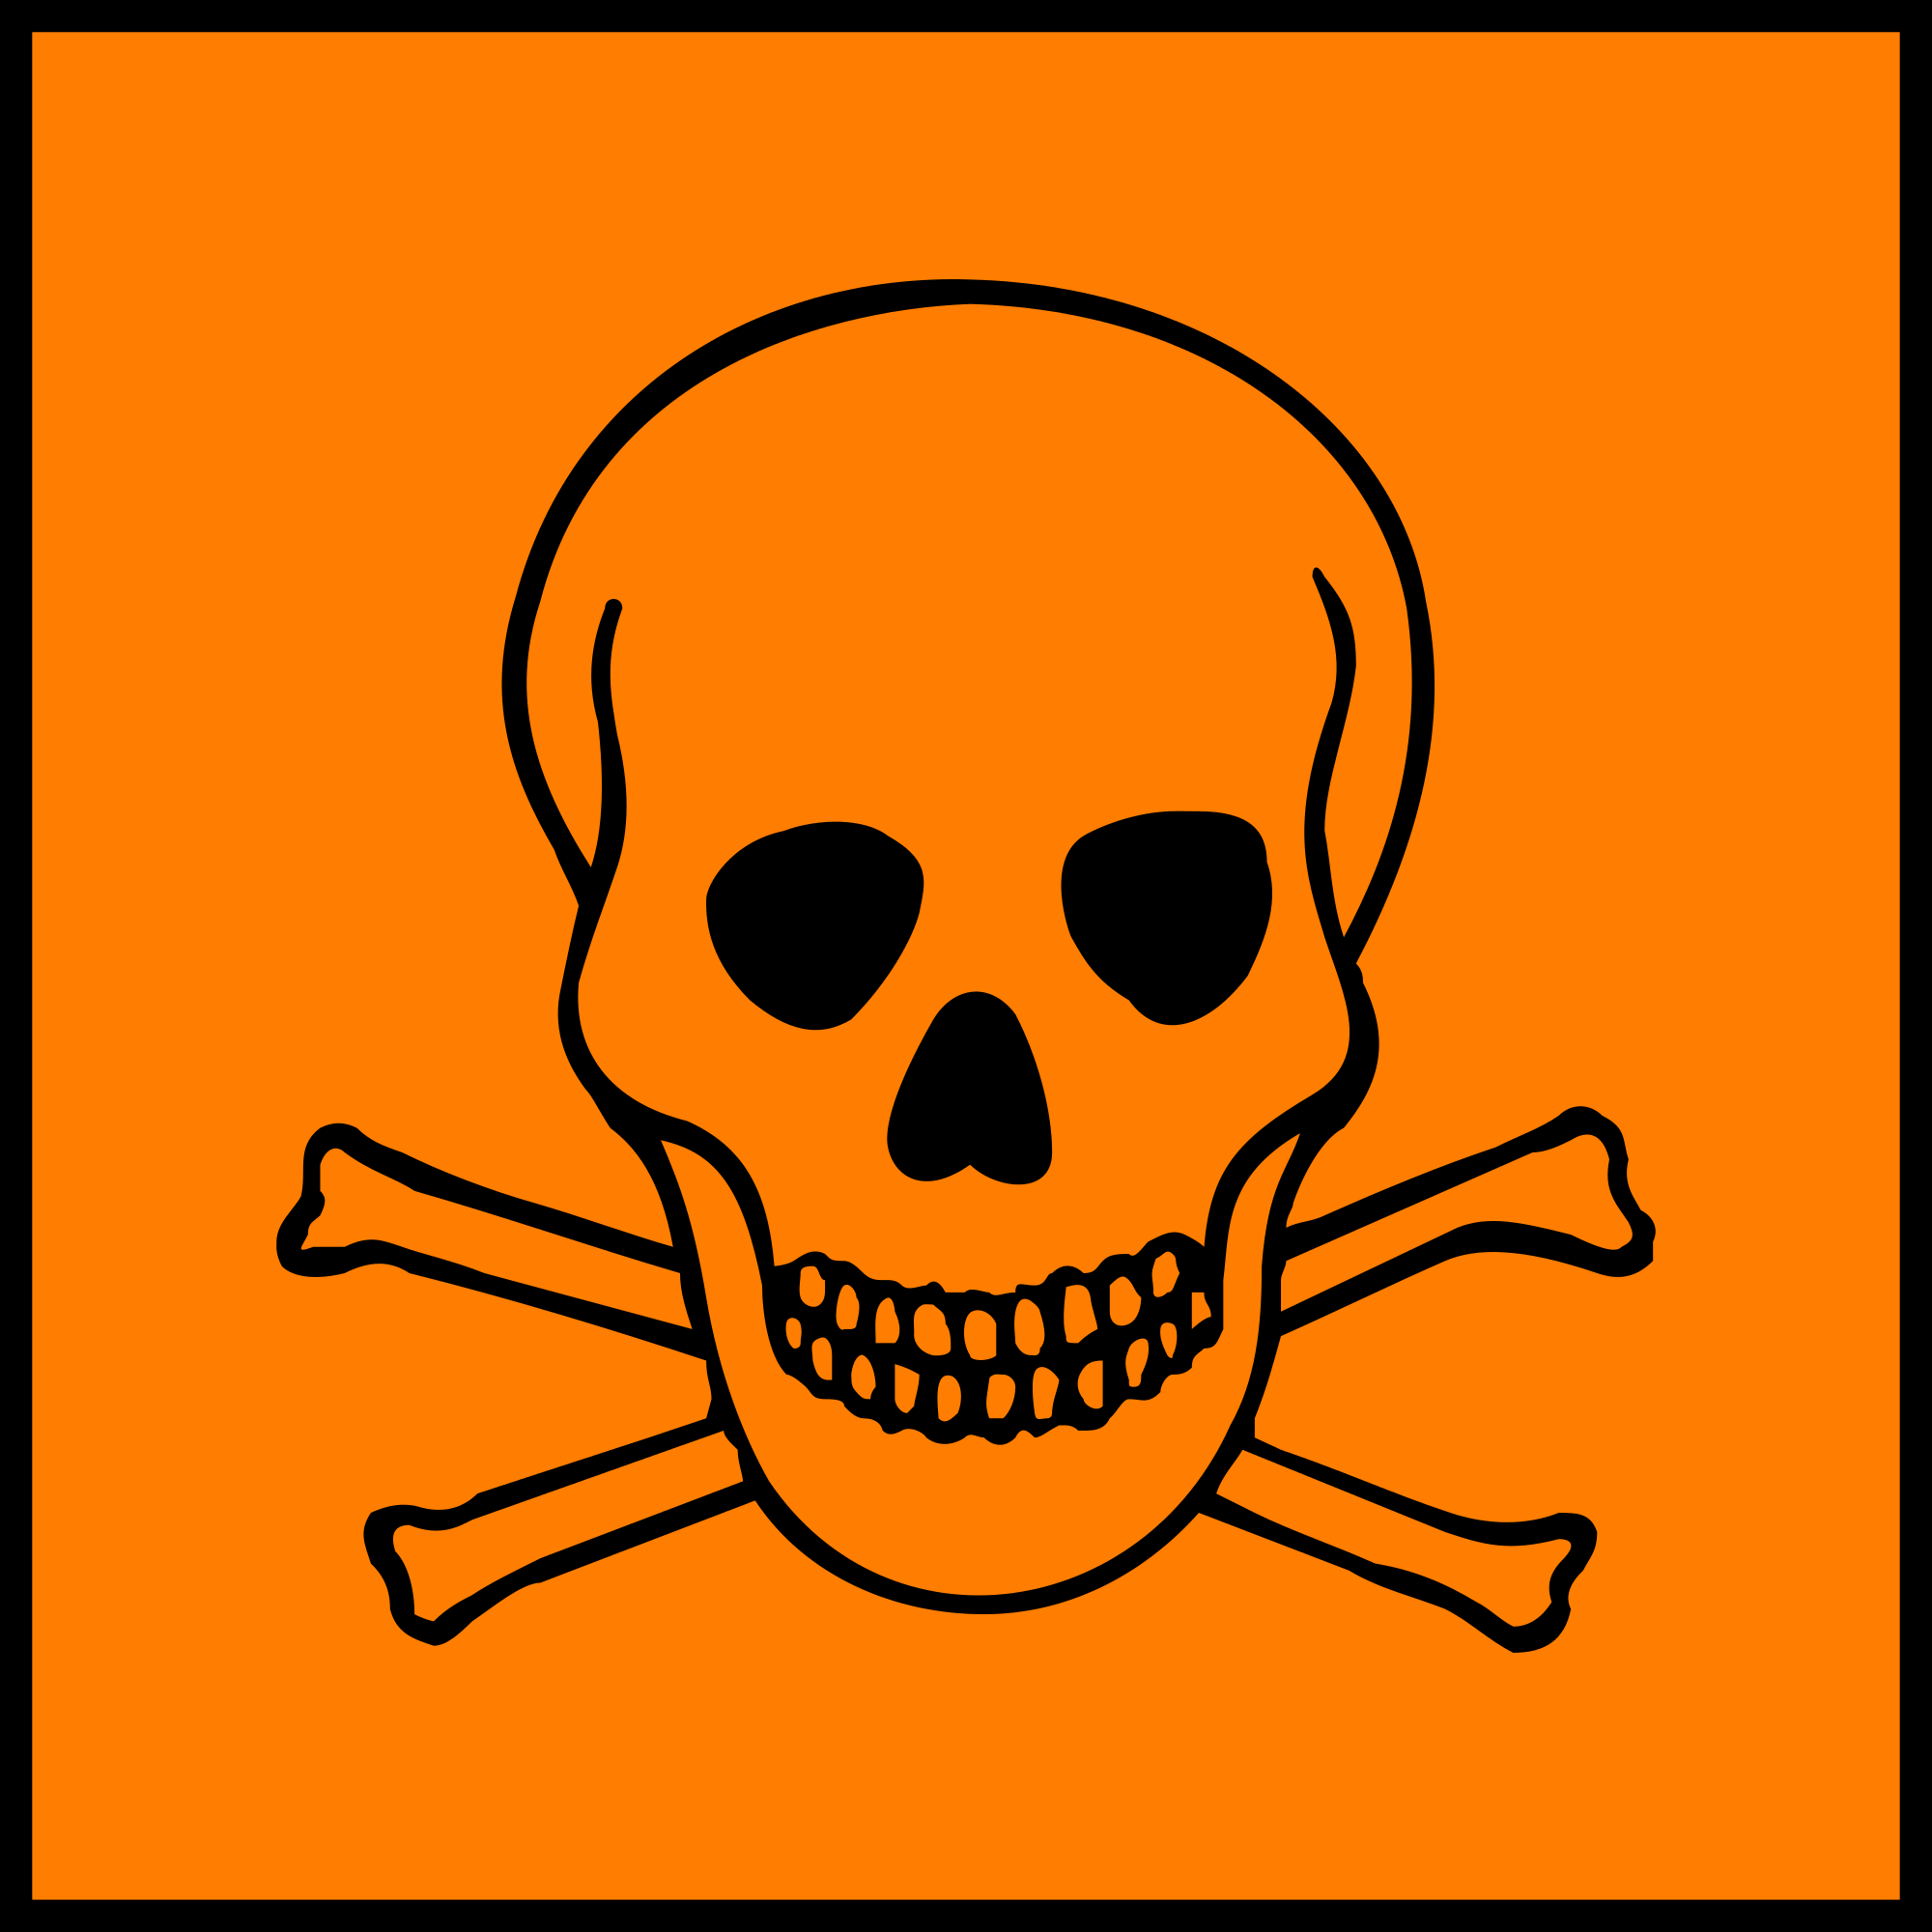 The Toxic Symbol - ClipArt Best